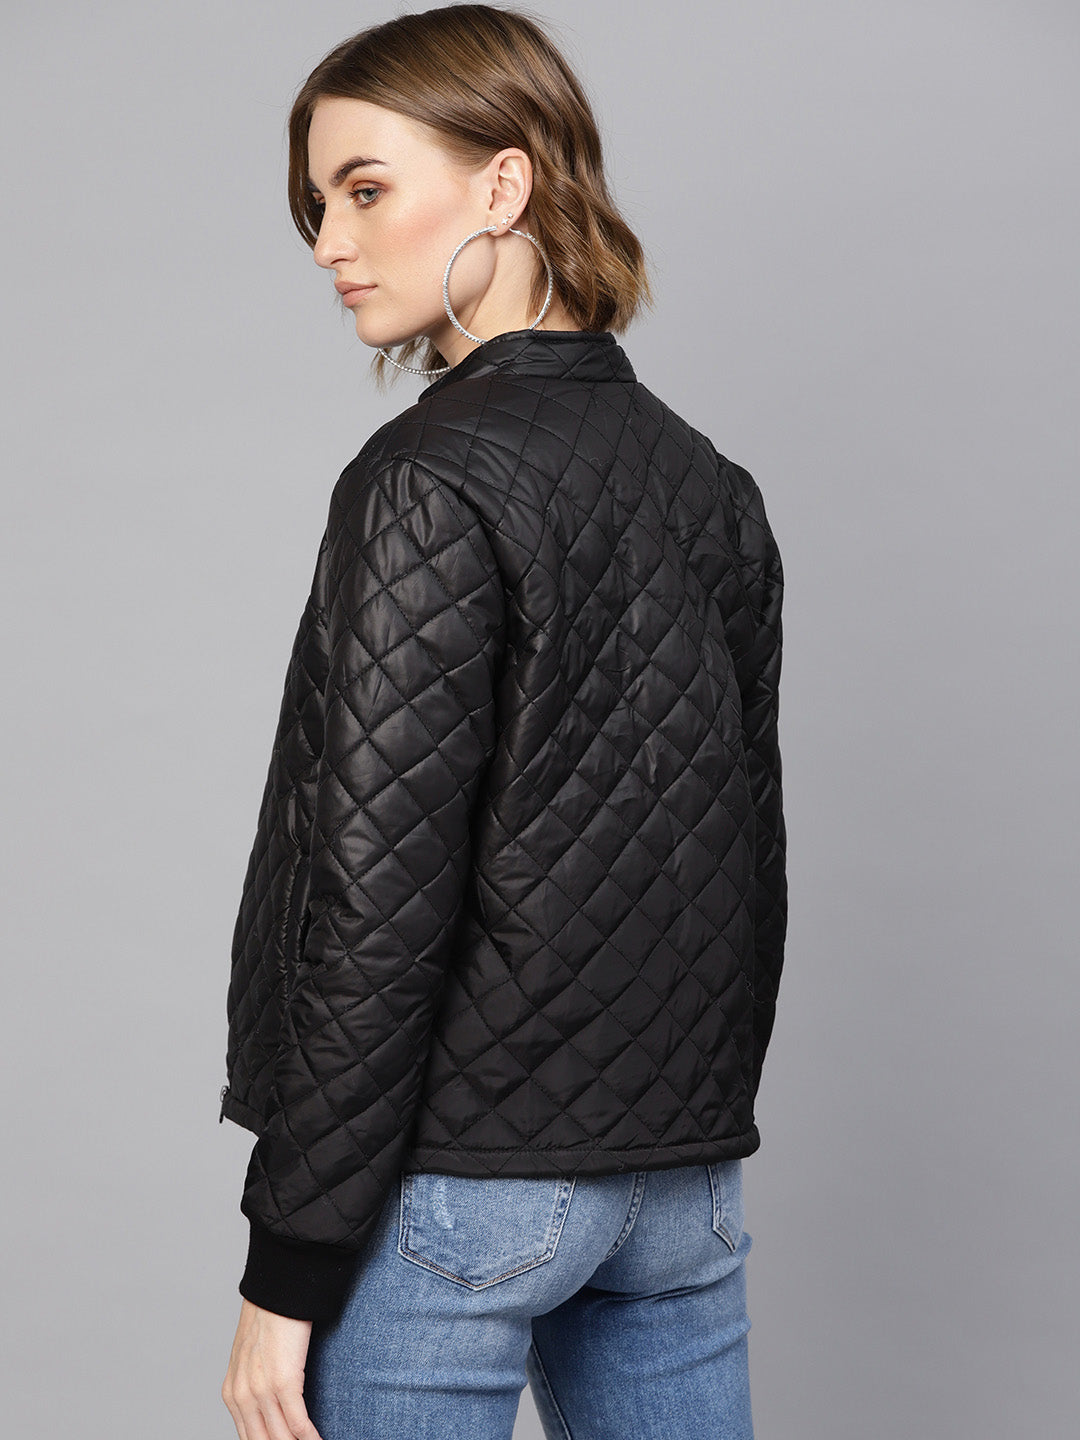 Black Quilted Jacket With Zip On Sleeves